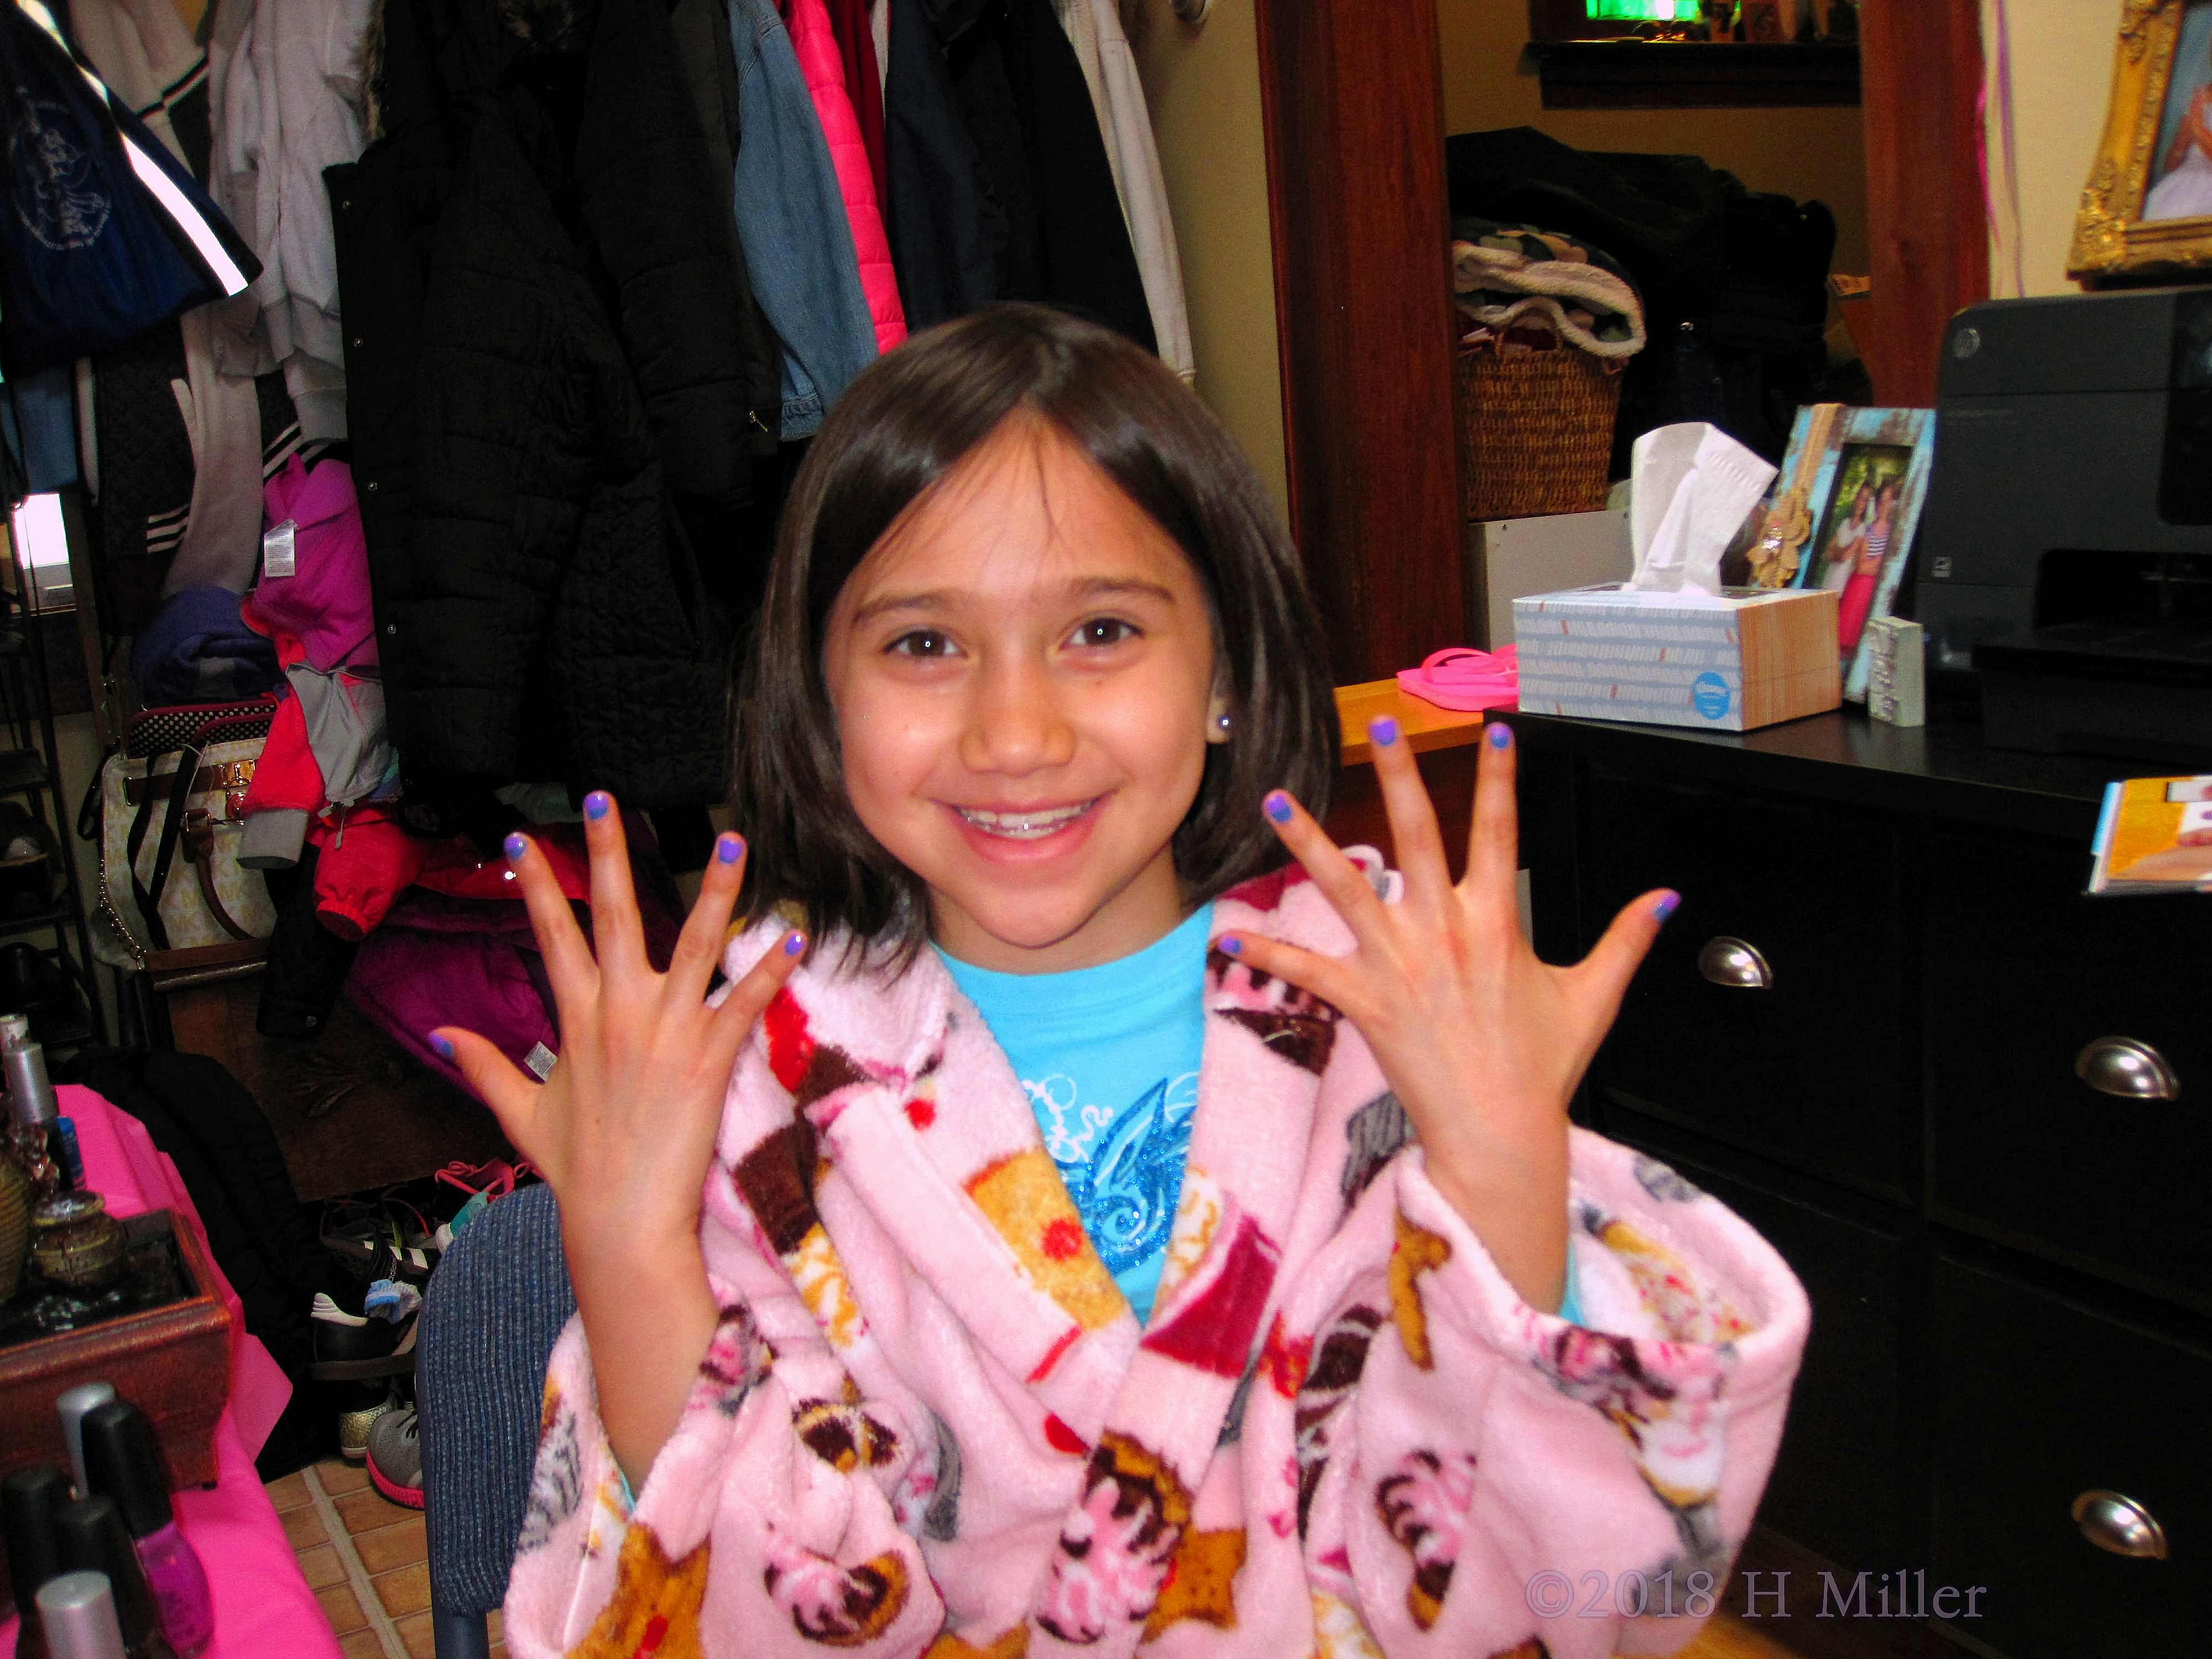 Showing Off Her Beautiful Girls Manicure With A Big Smile! 4